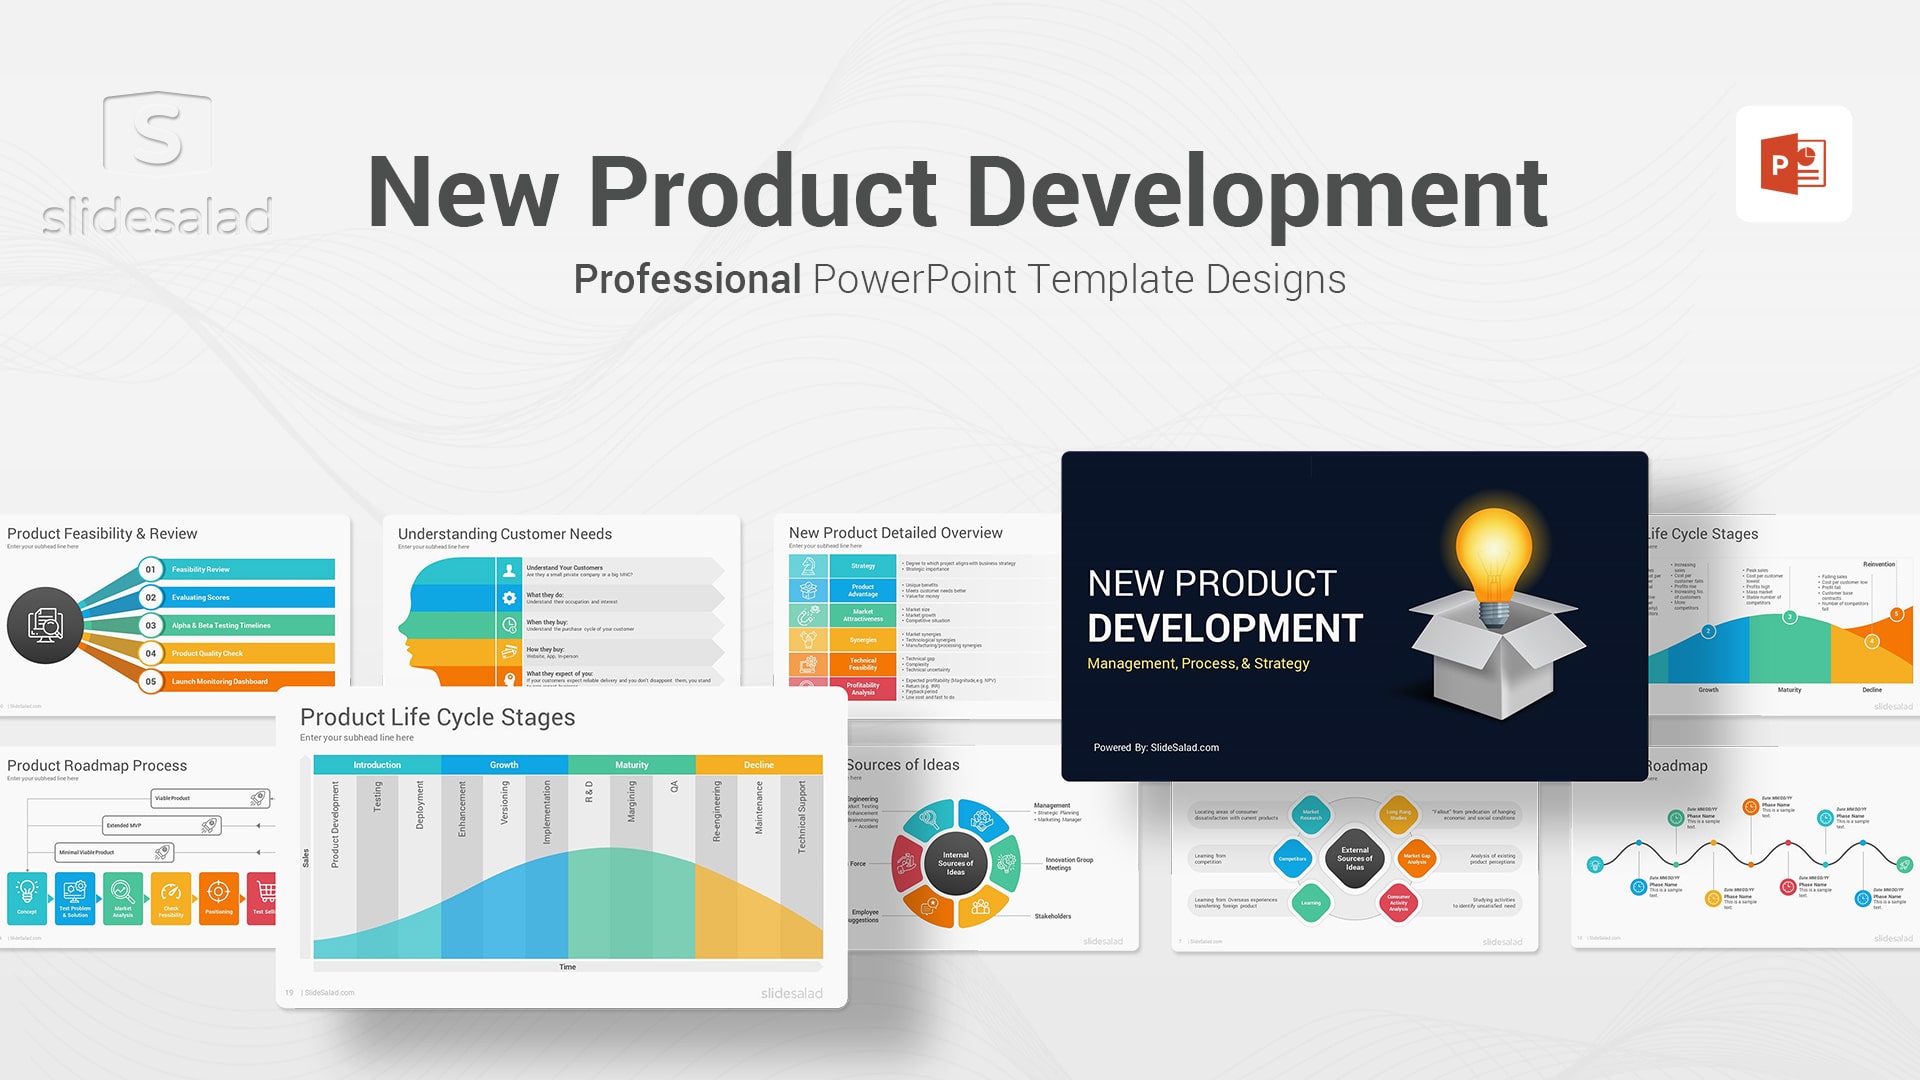 New Product Development PowerPoint Template - Innovative PPT Templates for Product Development Processes